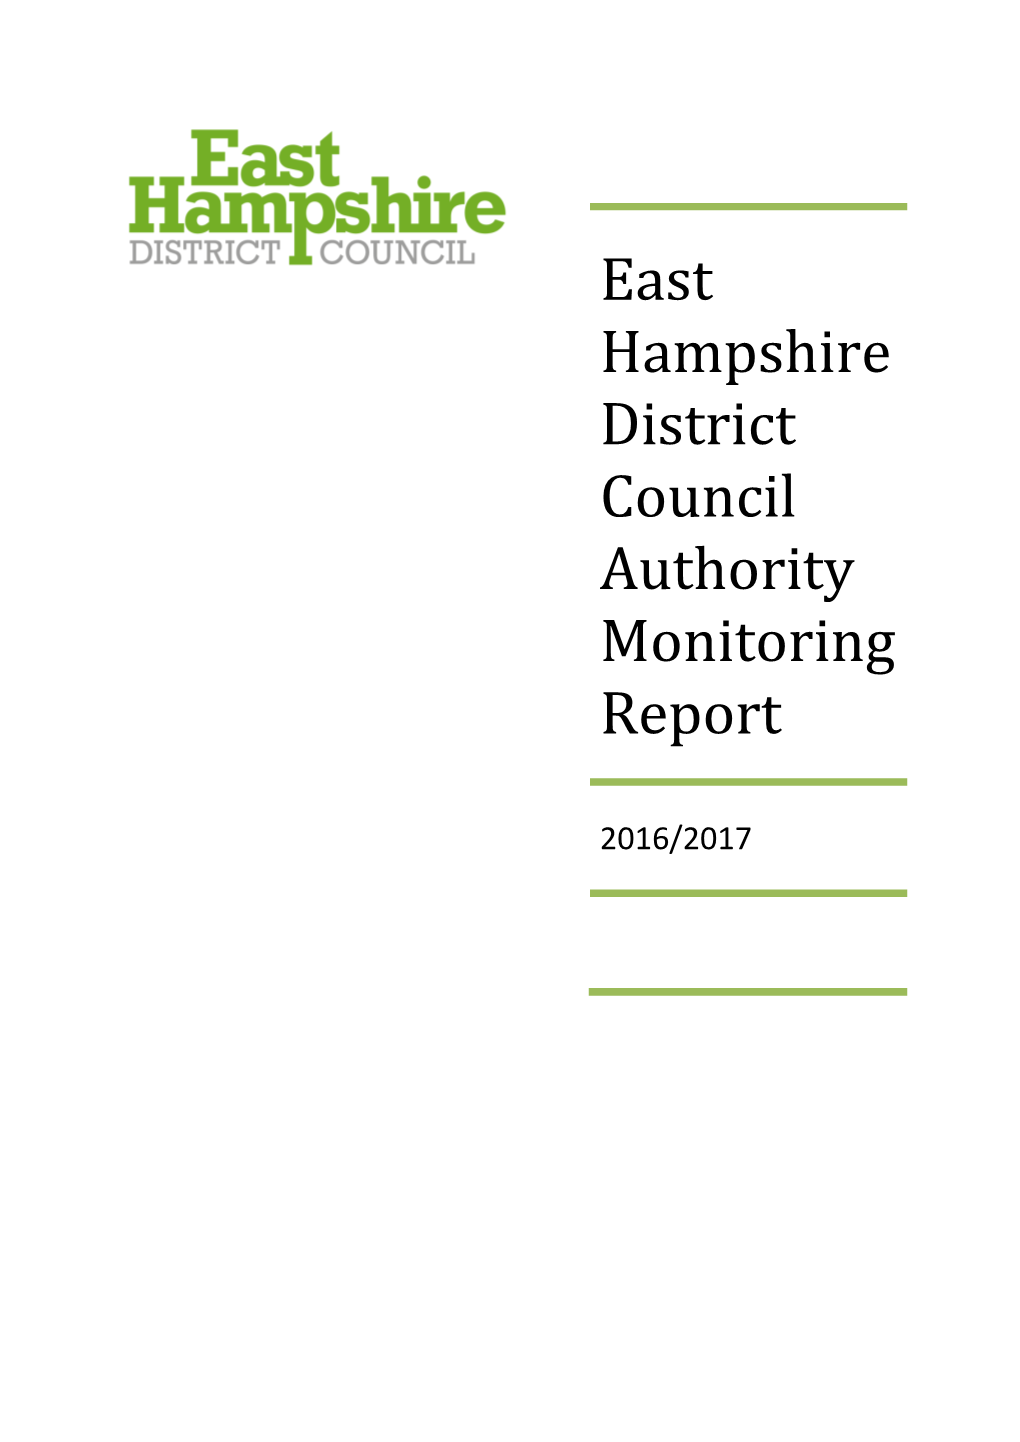 East Hampshire District Council Authority Monitoring Report